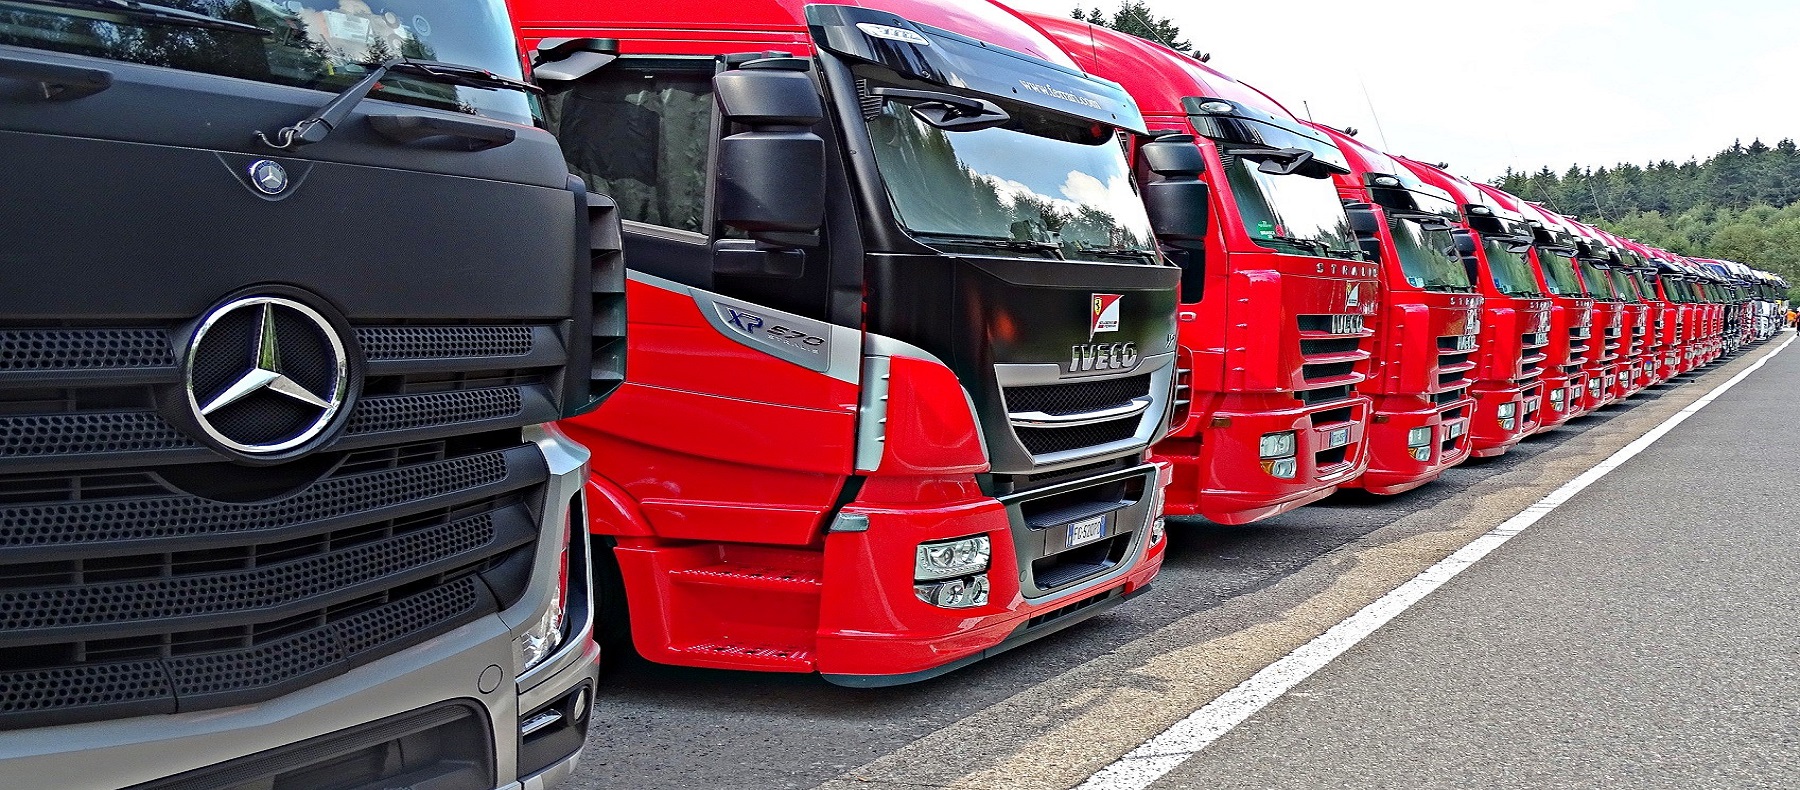 A fleet of red and black trucks parked in a lot